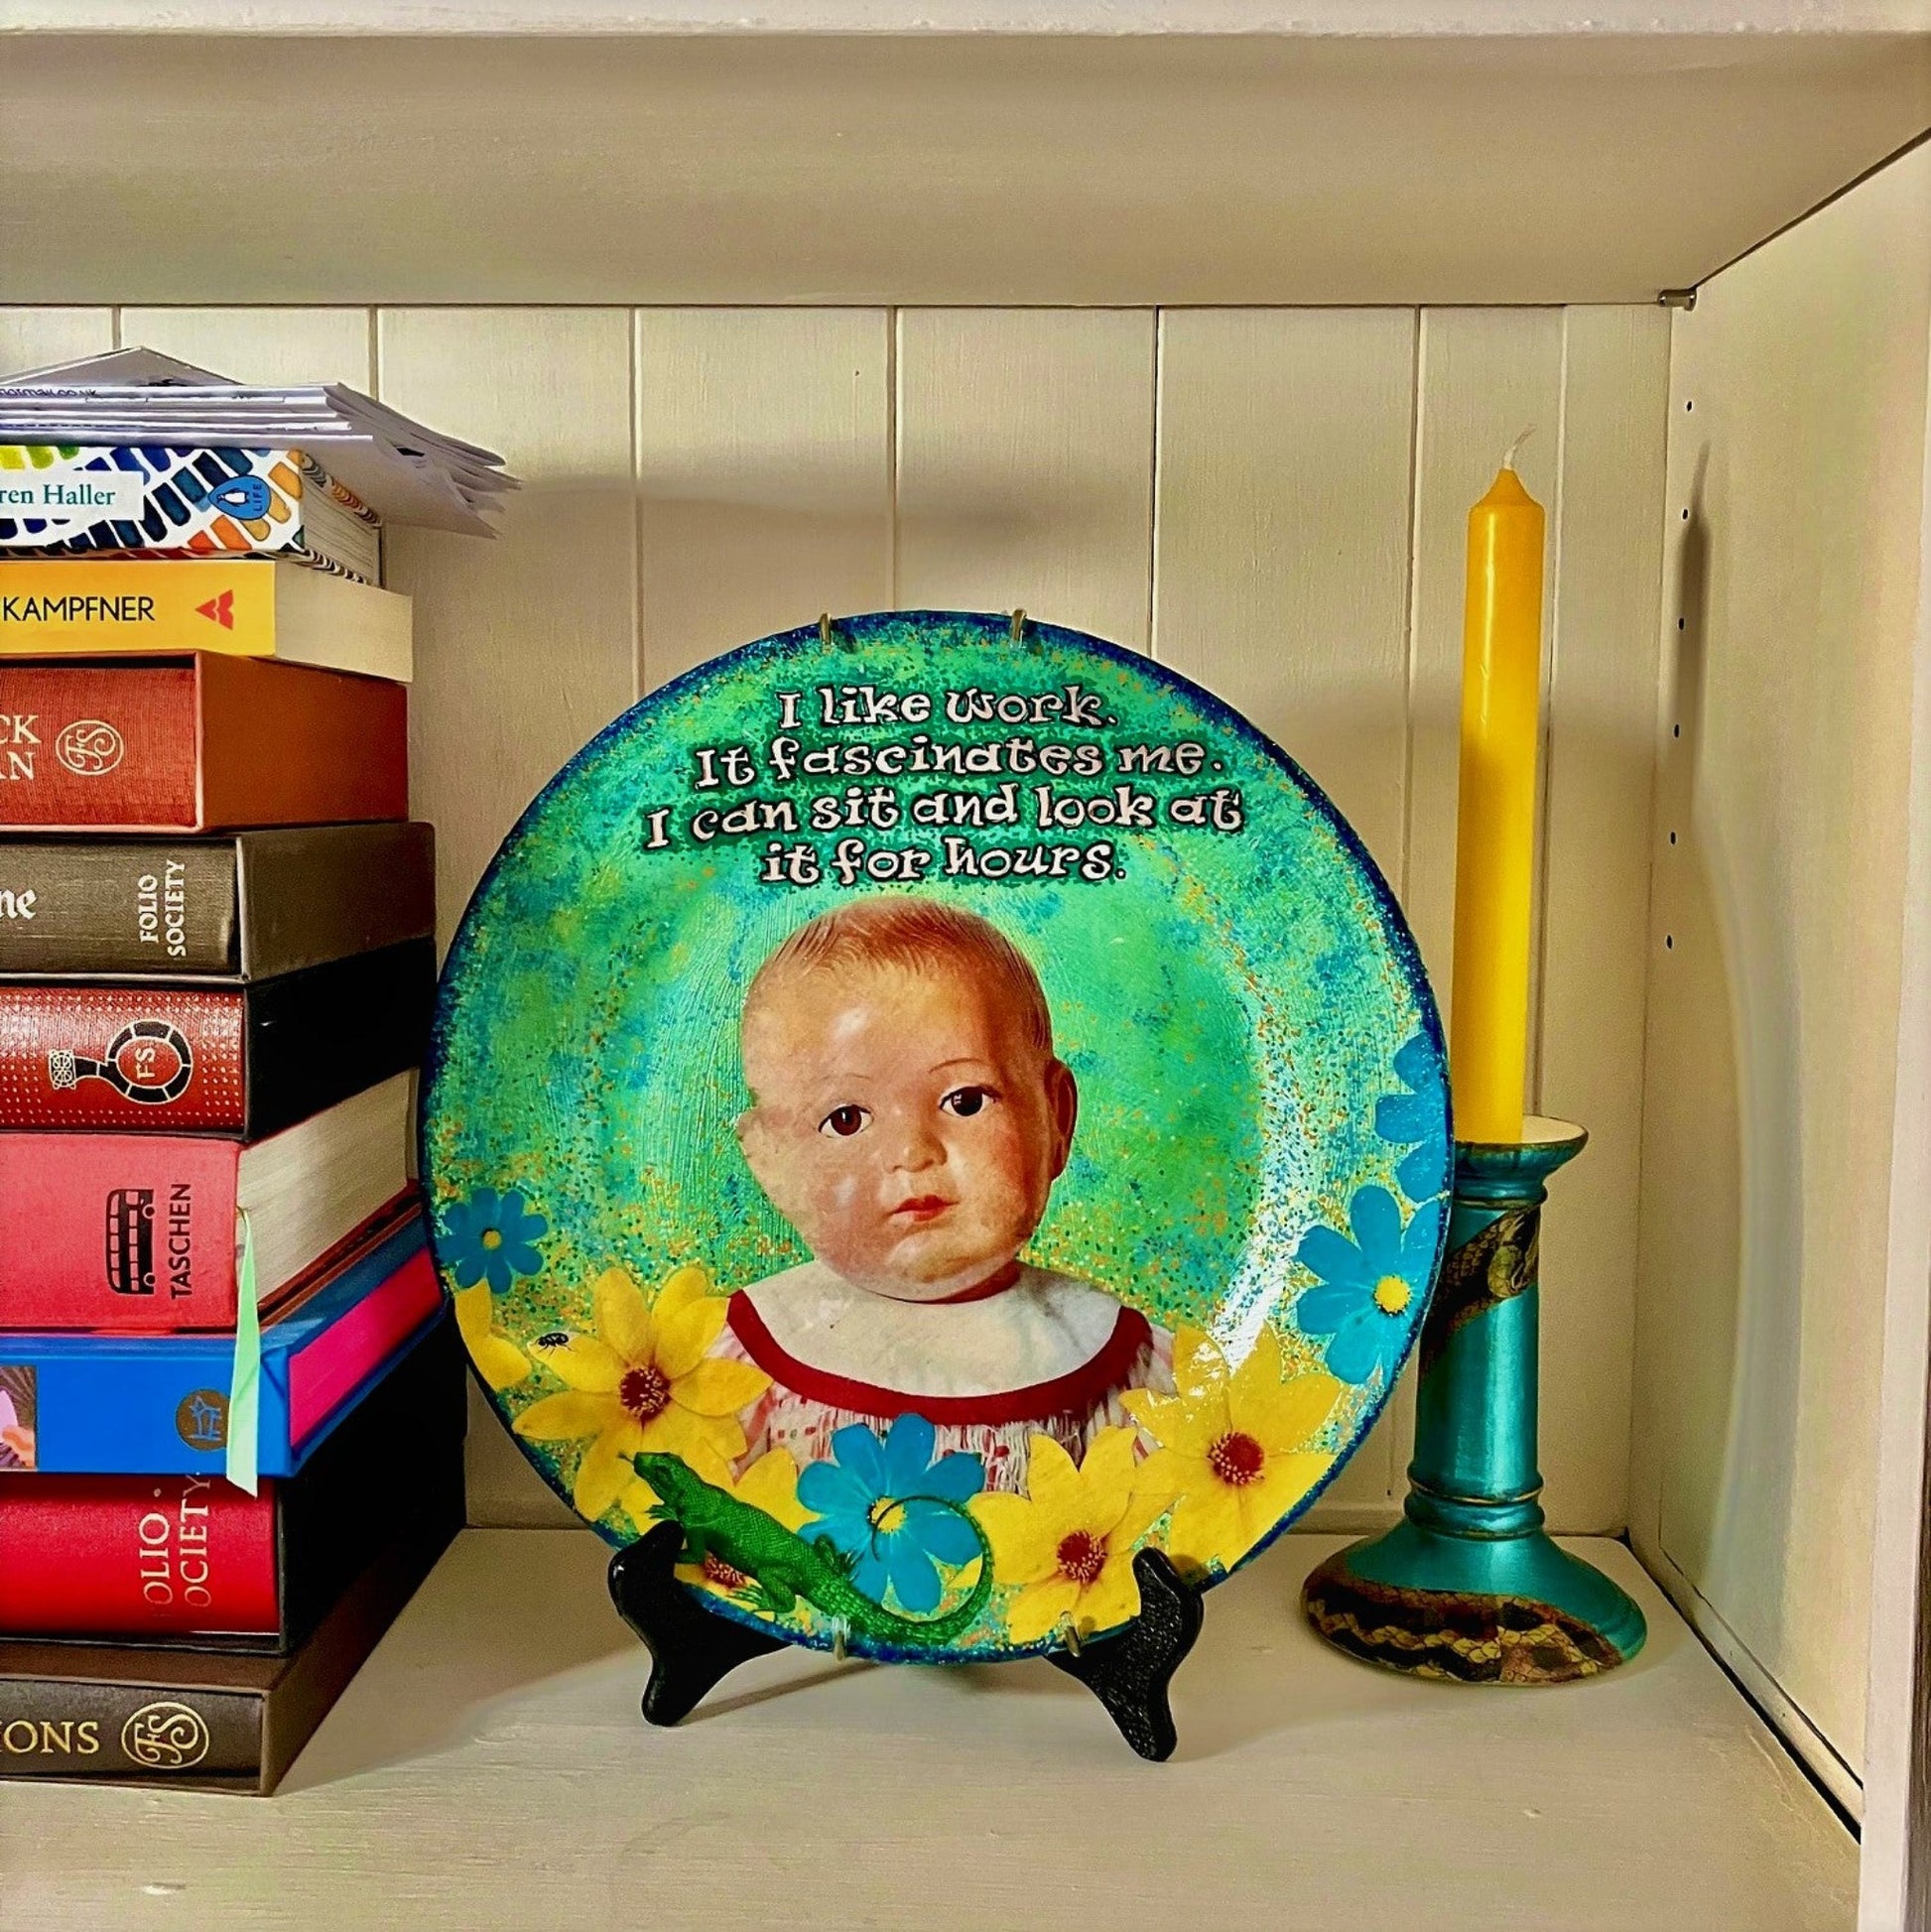 House of Frisson "I Like Work It Fascinates Me I Can Sit And Look At It For Hours" Green Wall Plate front. Collage artwork featuring a vintage male doll looking miserable among flowers, a lizard, and a fly, on a green background. Plate on a plate stand, resting on a bookshelf.